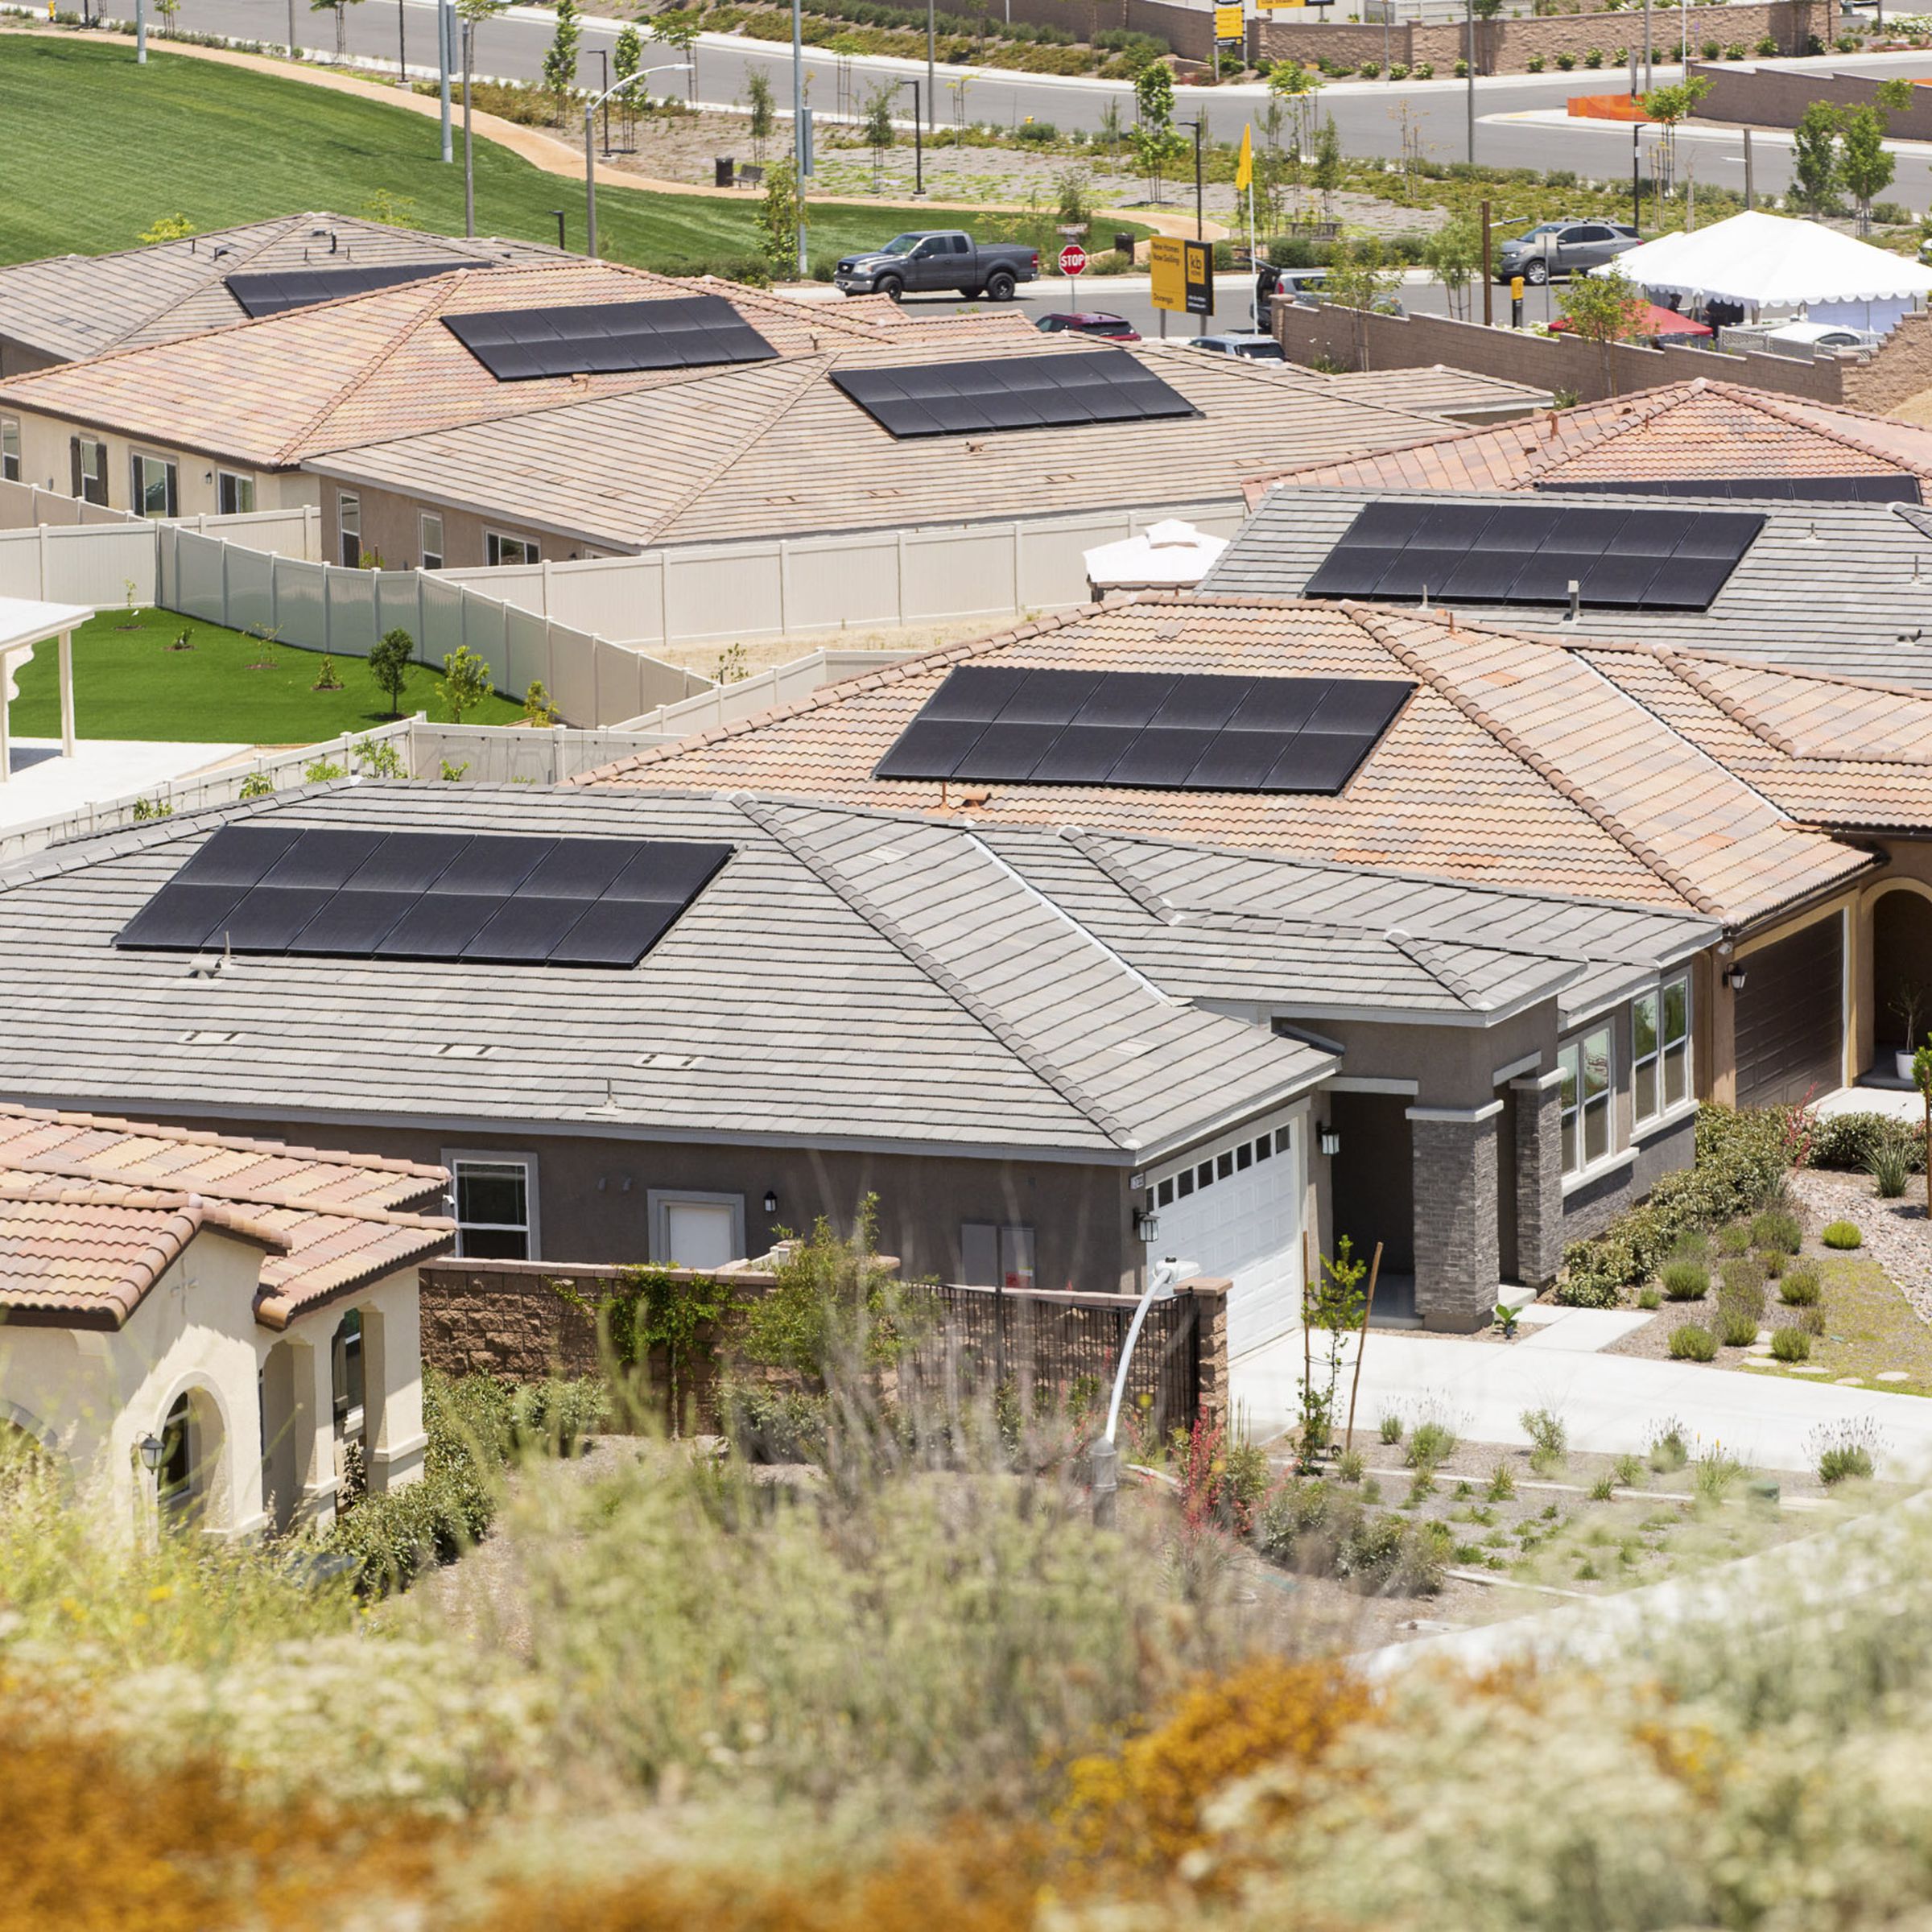 KB Home’s Durango at Shadow Mountain is an experimental smart microgrid community that is energy independent. It’s located about 90 miles southeast of Los Angeles, near Menifee, California.